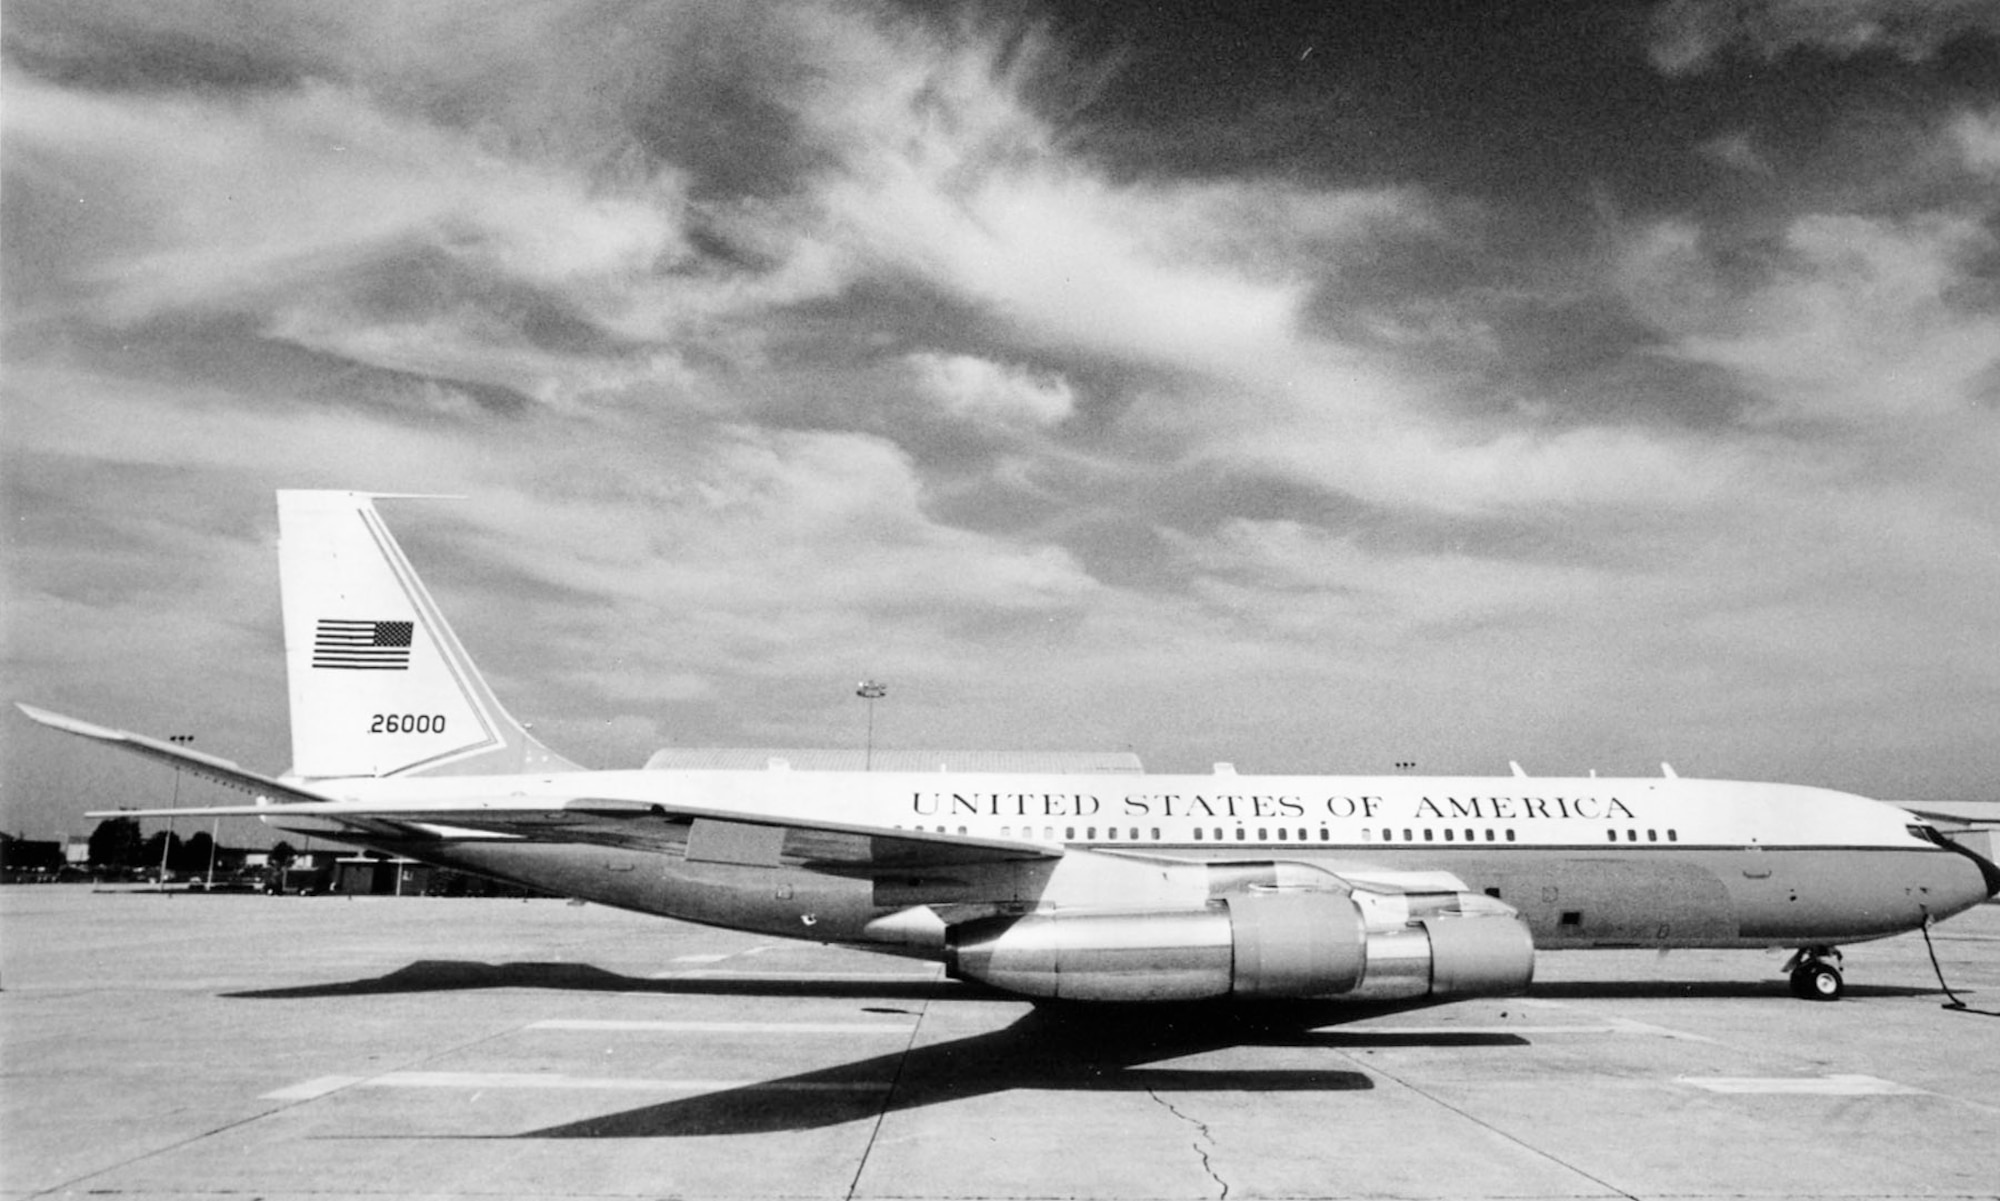 Boeing VC-137C SAM 26000 (Air Force One) on the tarmac at an unidentified location. (U.S. Air Force photo)